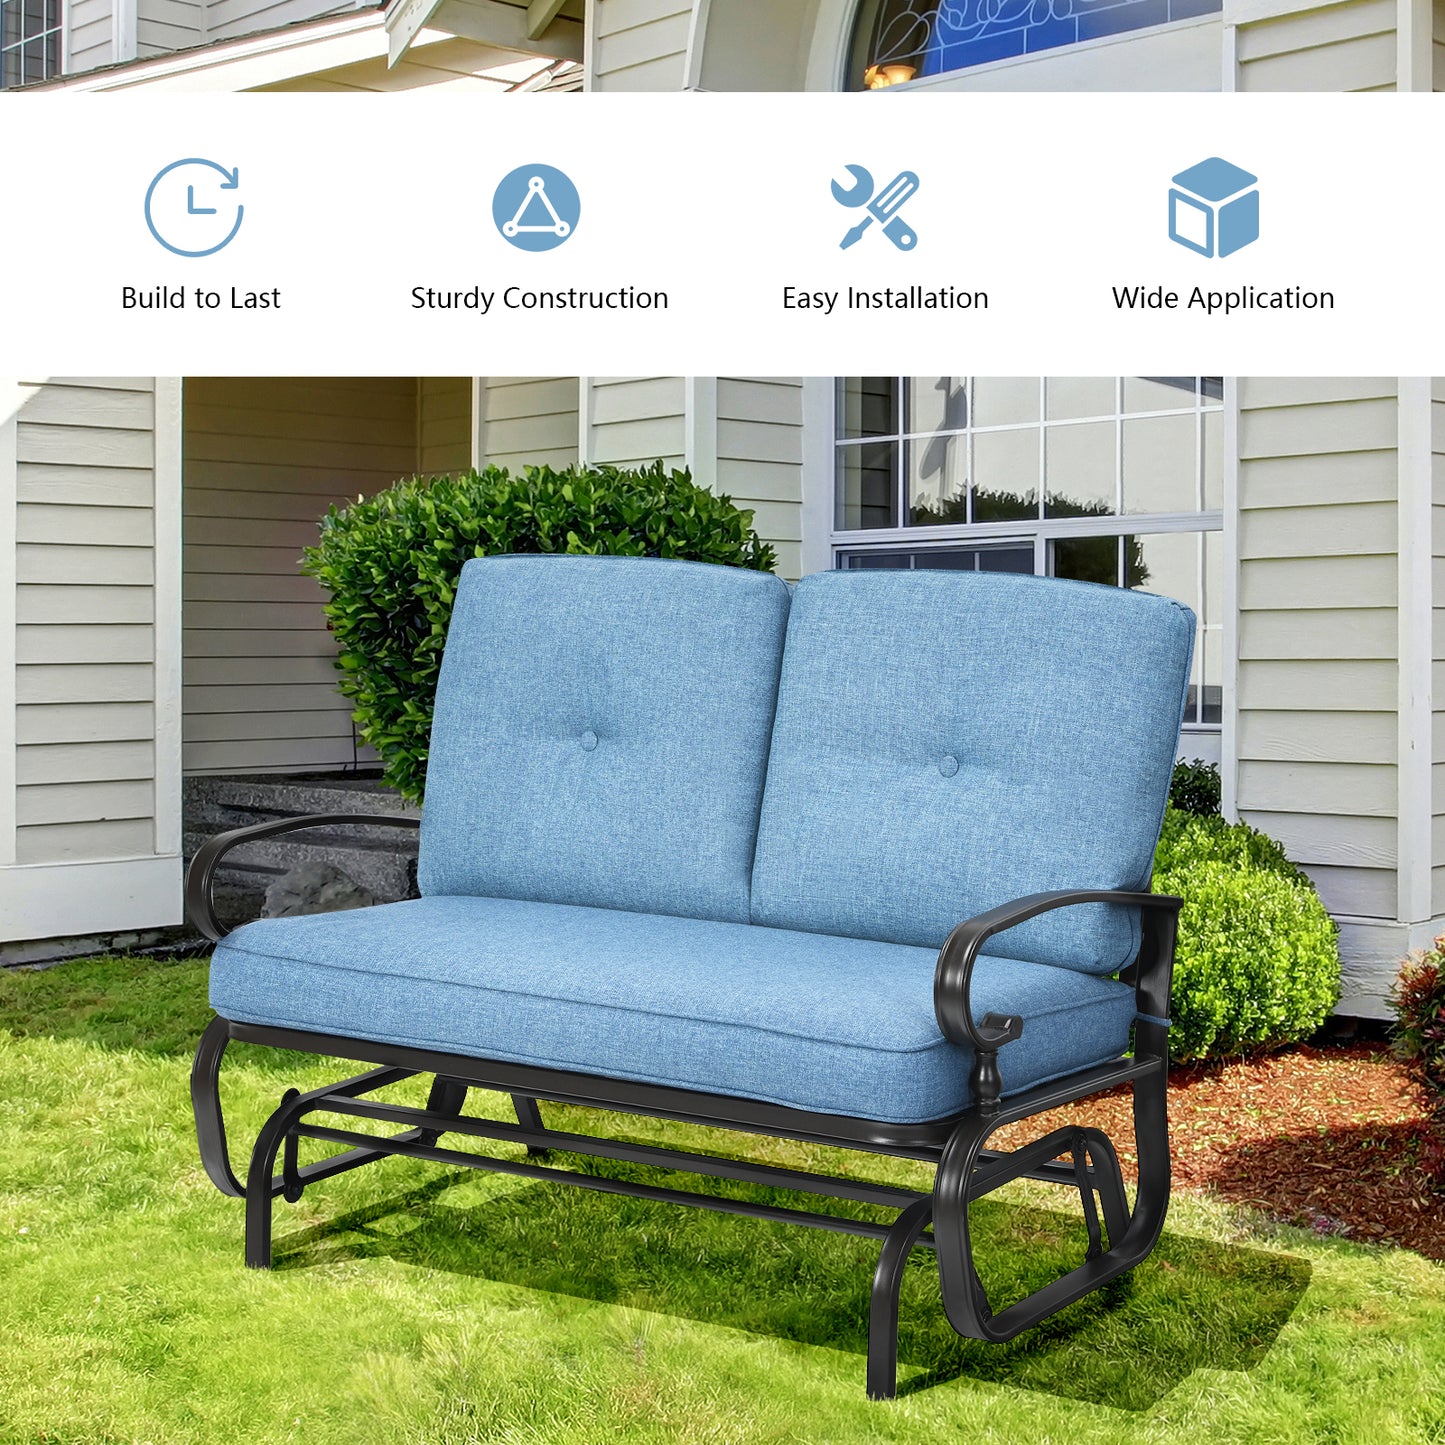 2 Seats Outdoor Swing Glider Chair with Comfortable Cushions-Blue